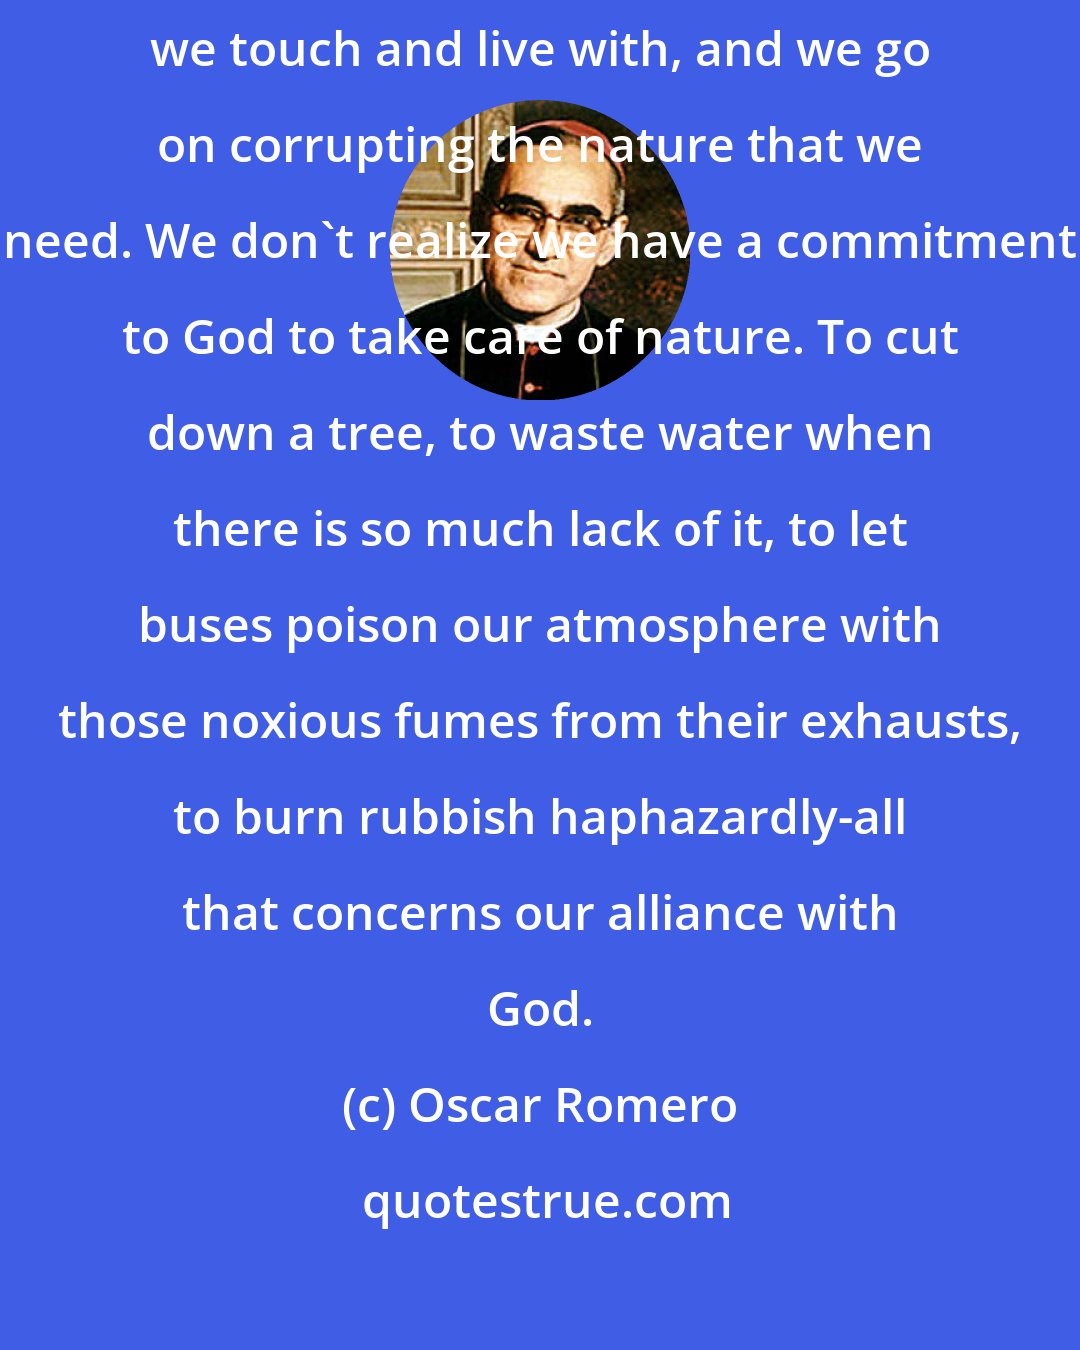 Oscar Romero: You know that the air and water are being polluted, as is everything we touch and live with, and we go on corrupting the nature that we need. We don't realize we have a commitment to God to take care of nature. To cut down a tree, to waste water when there is so much lack of it, to let buses poison our atmosphere with those noxious fumes from their exhausts, to burn rubbish haphazardly-all that concerns our alliance with God.